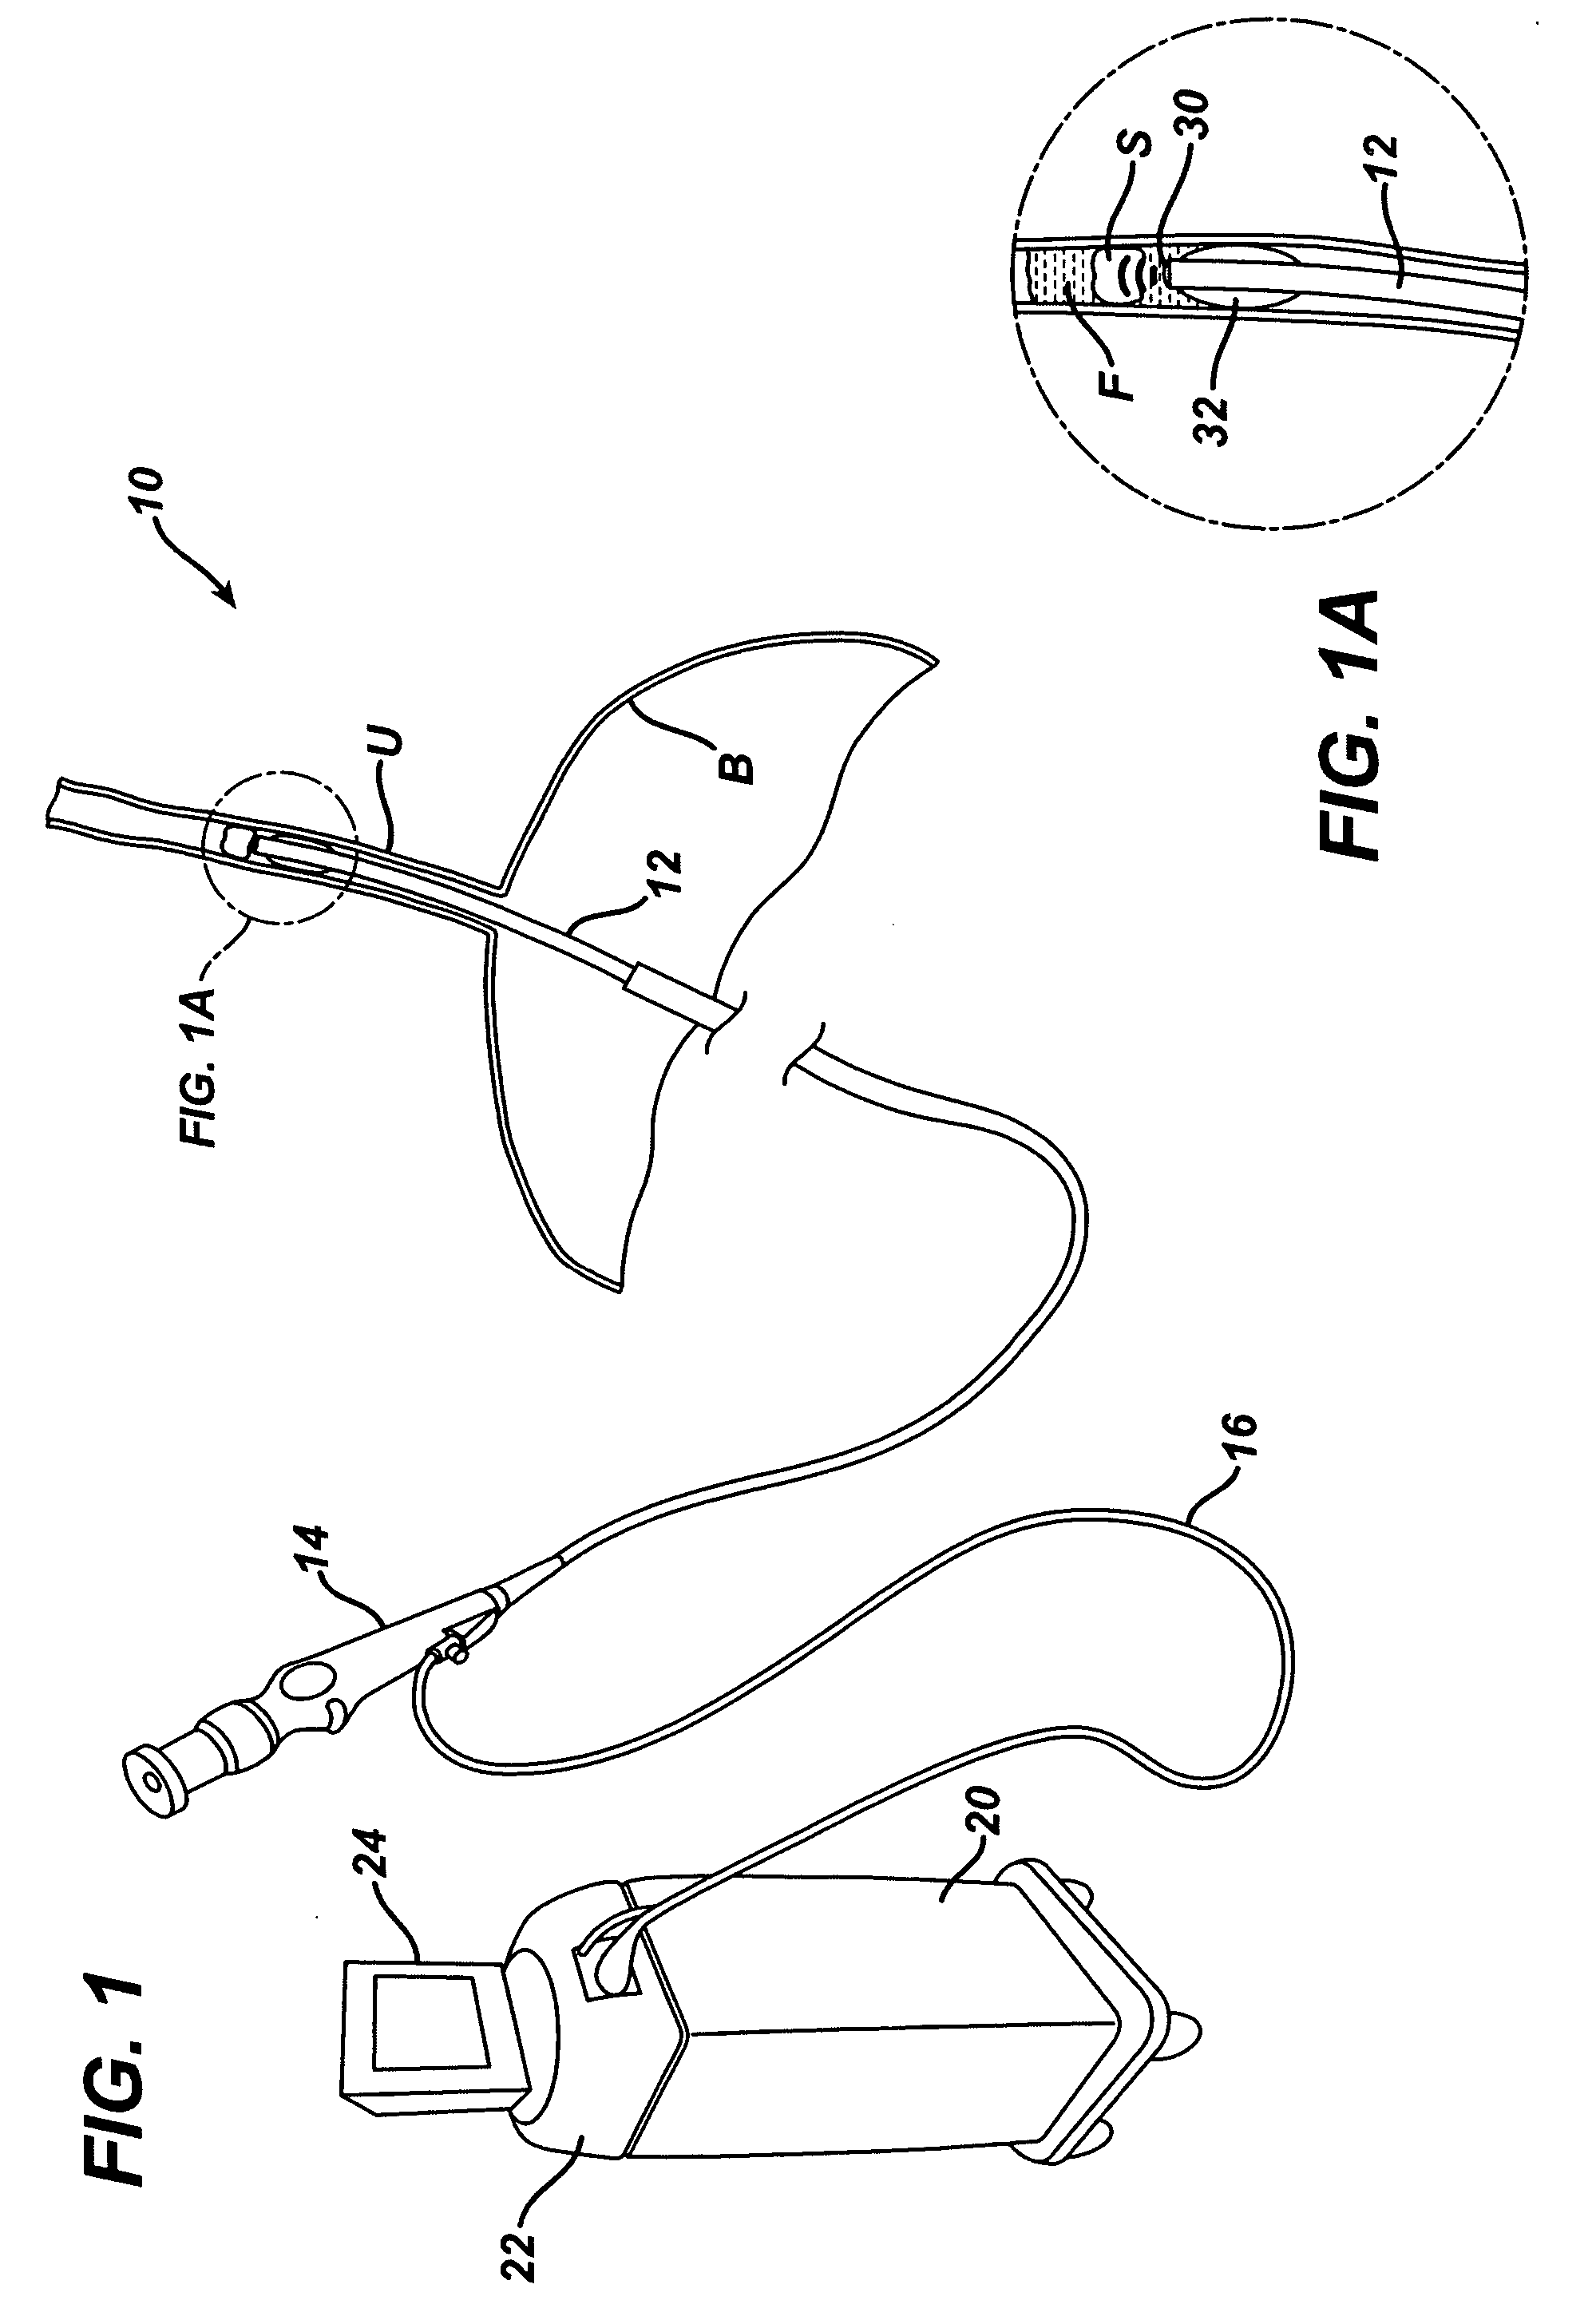 Ultrasonic device and method for treating stones within the body